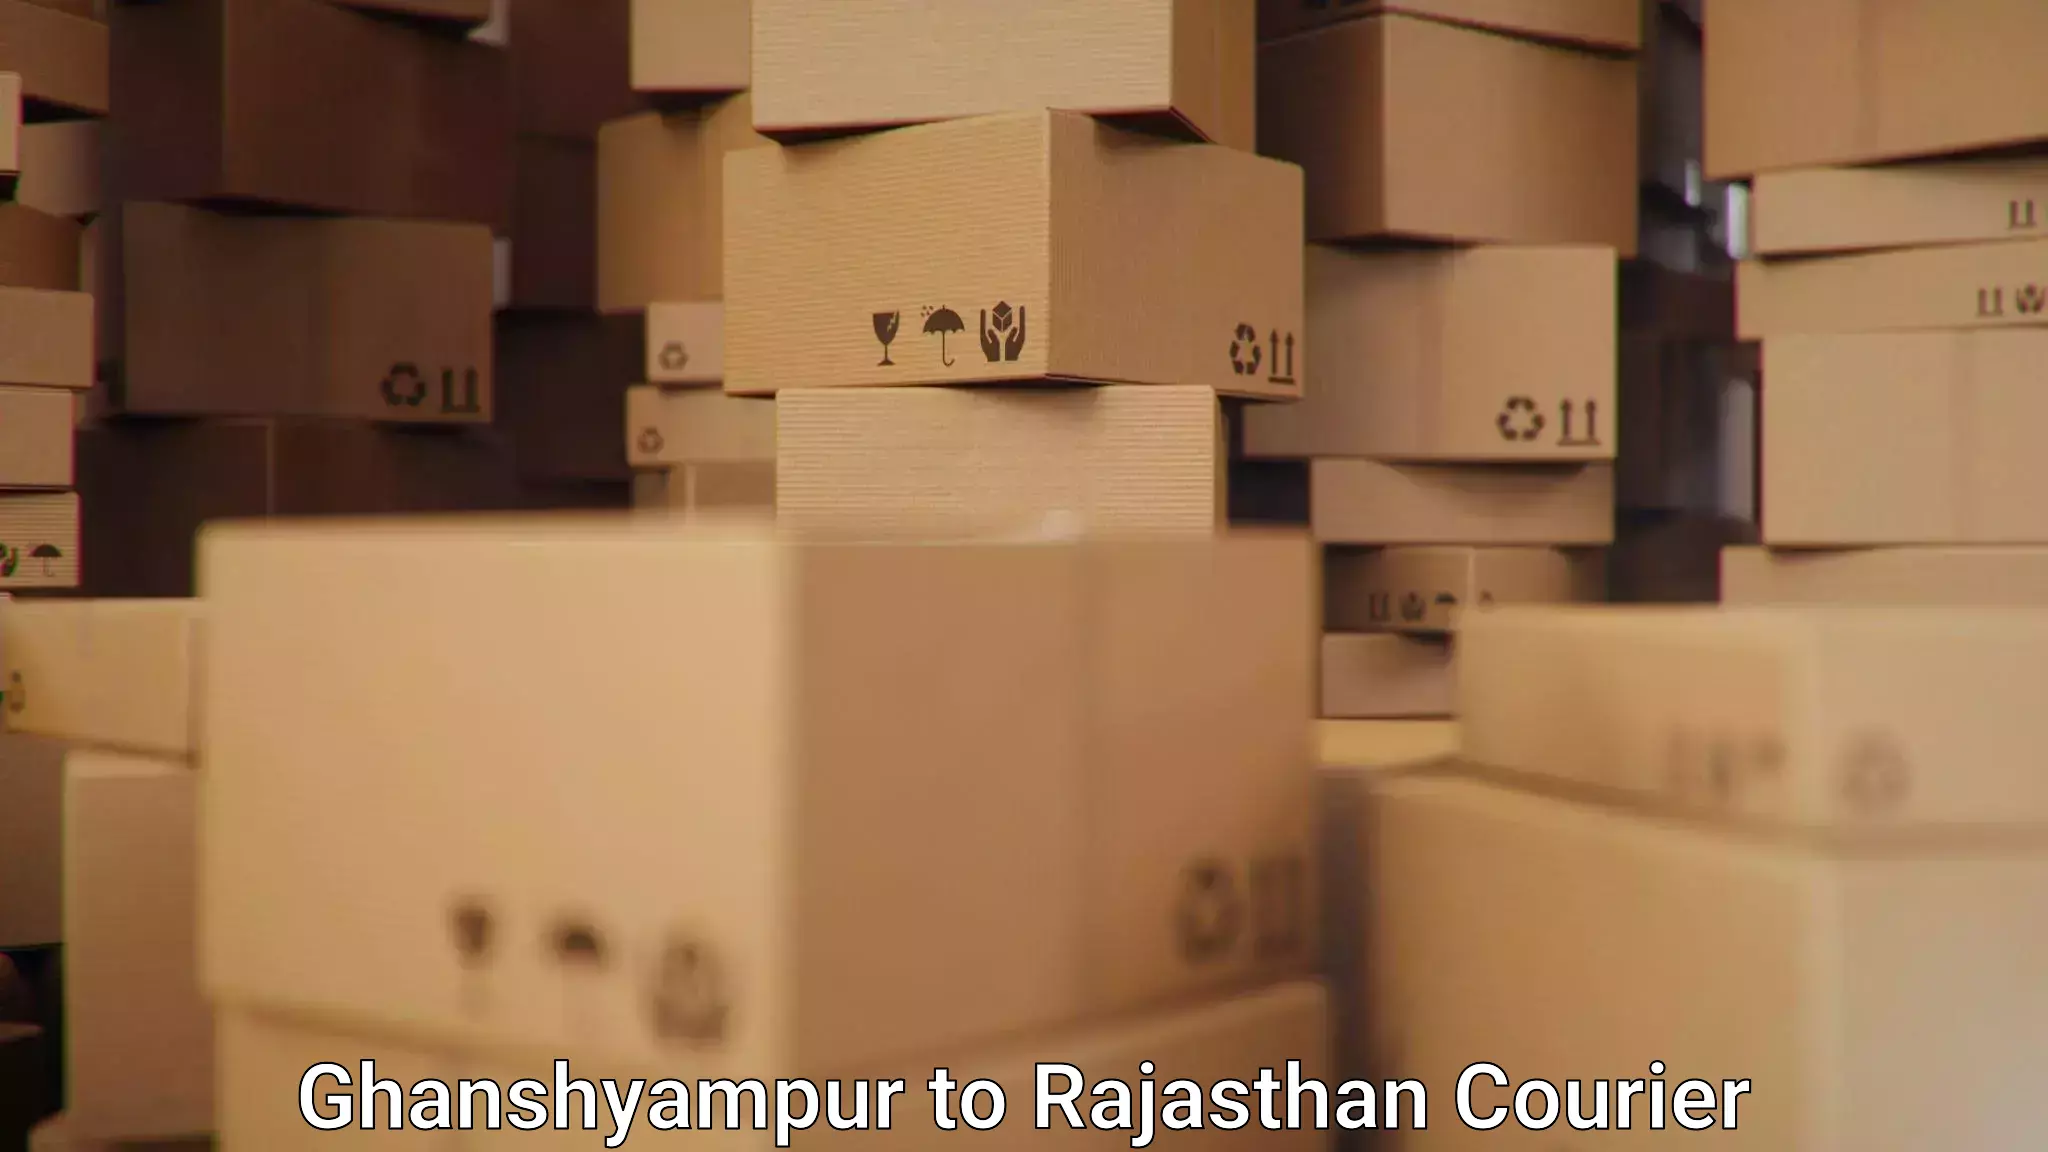 Customer-centric shipping Ghanshyampur to Yeswanthapur